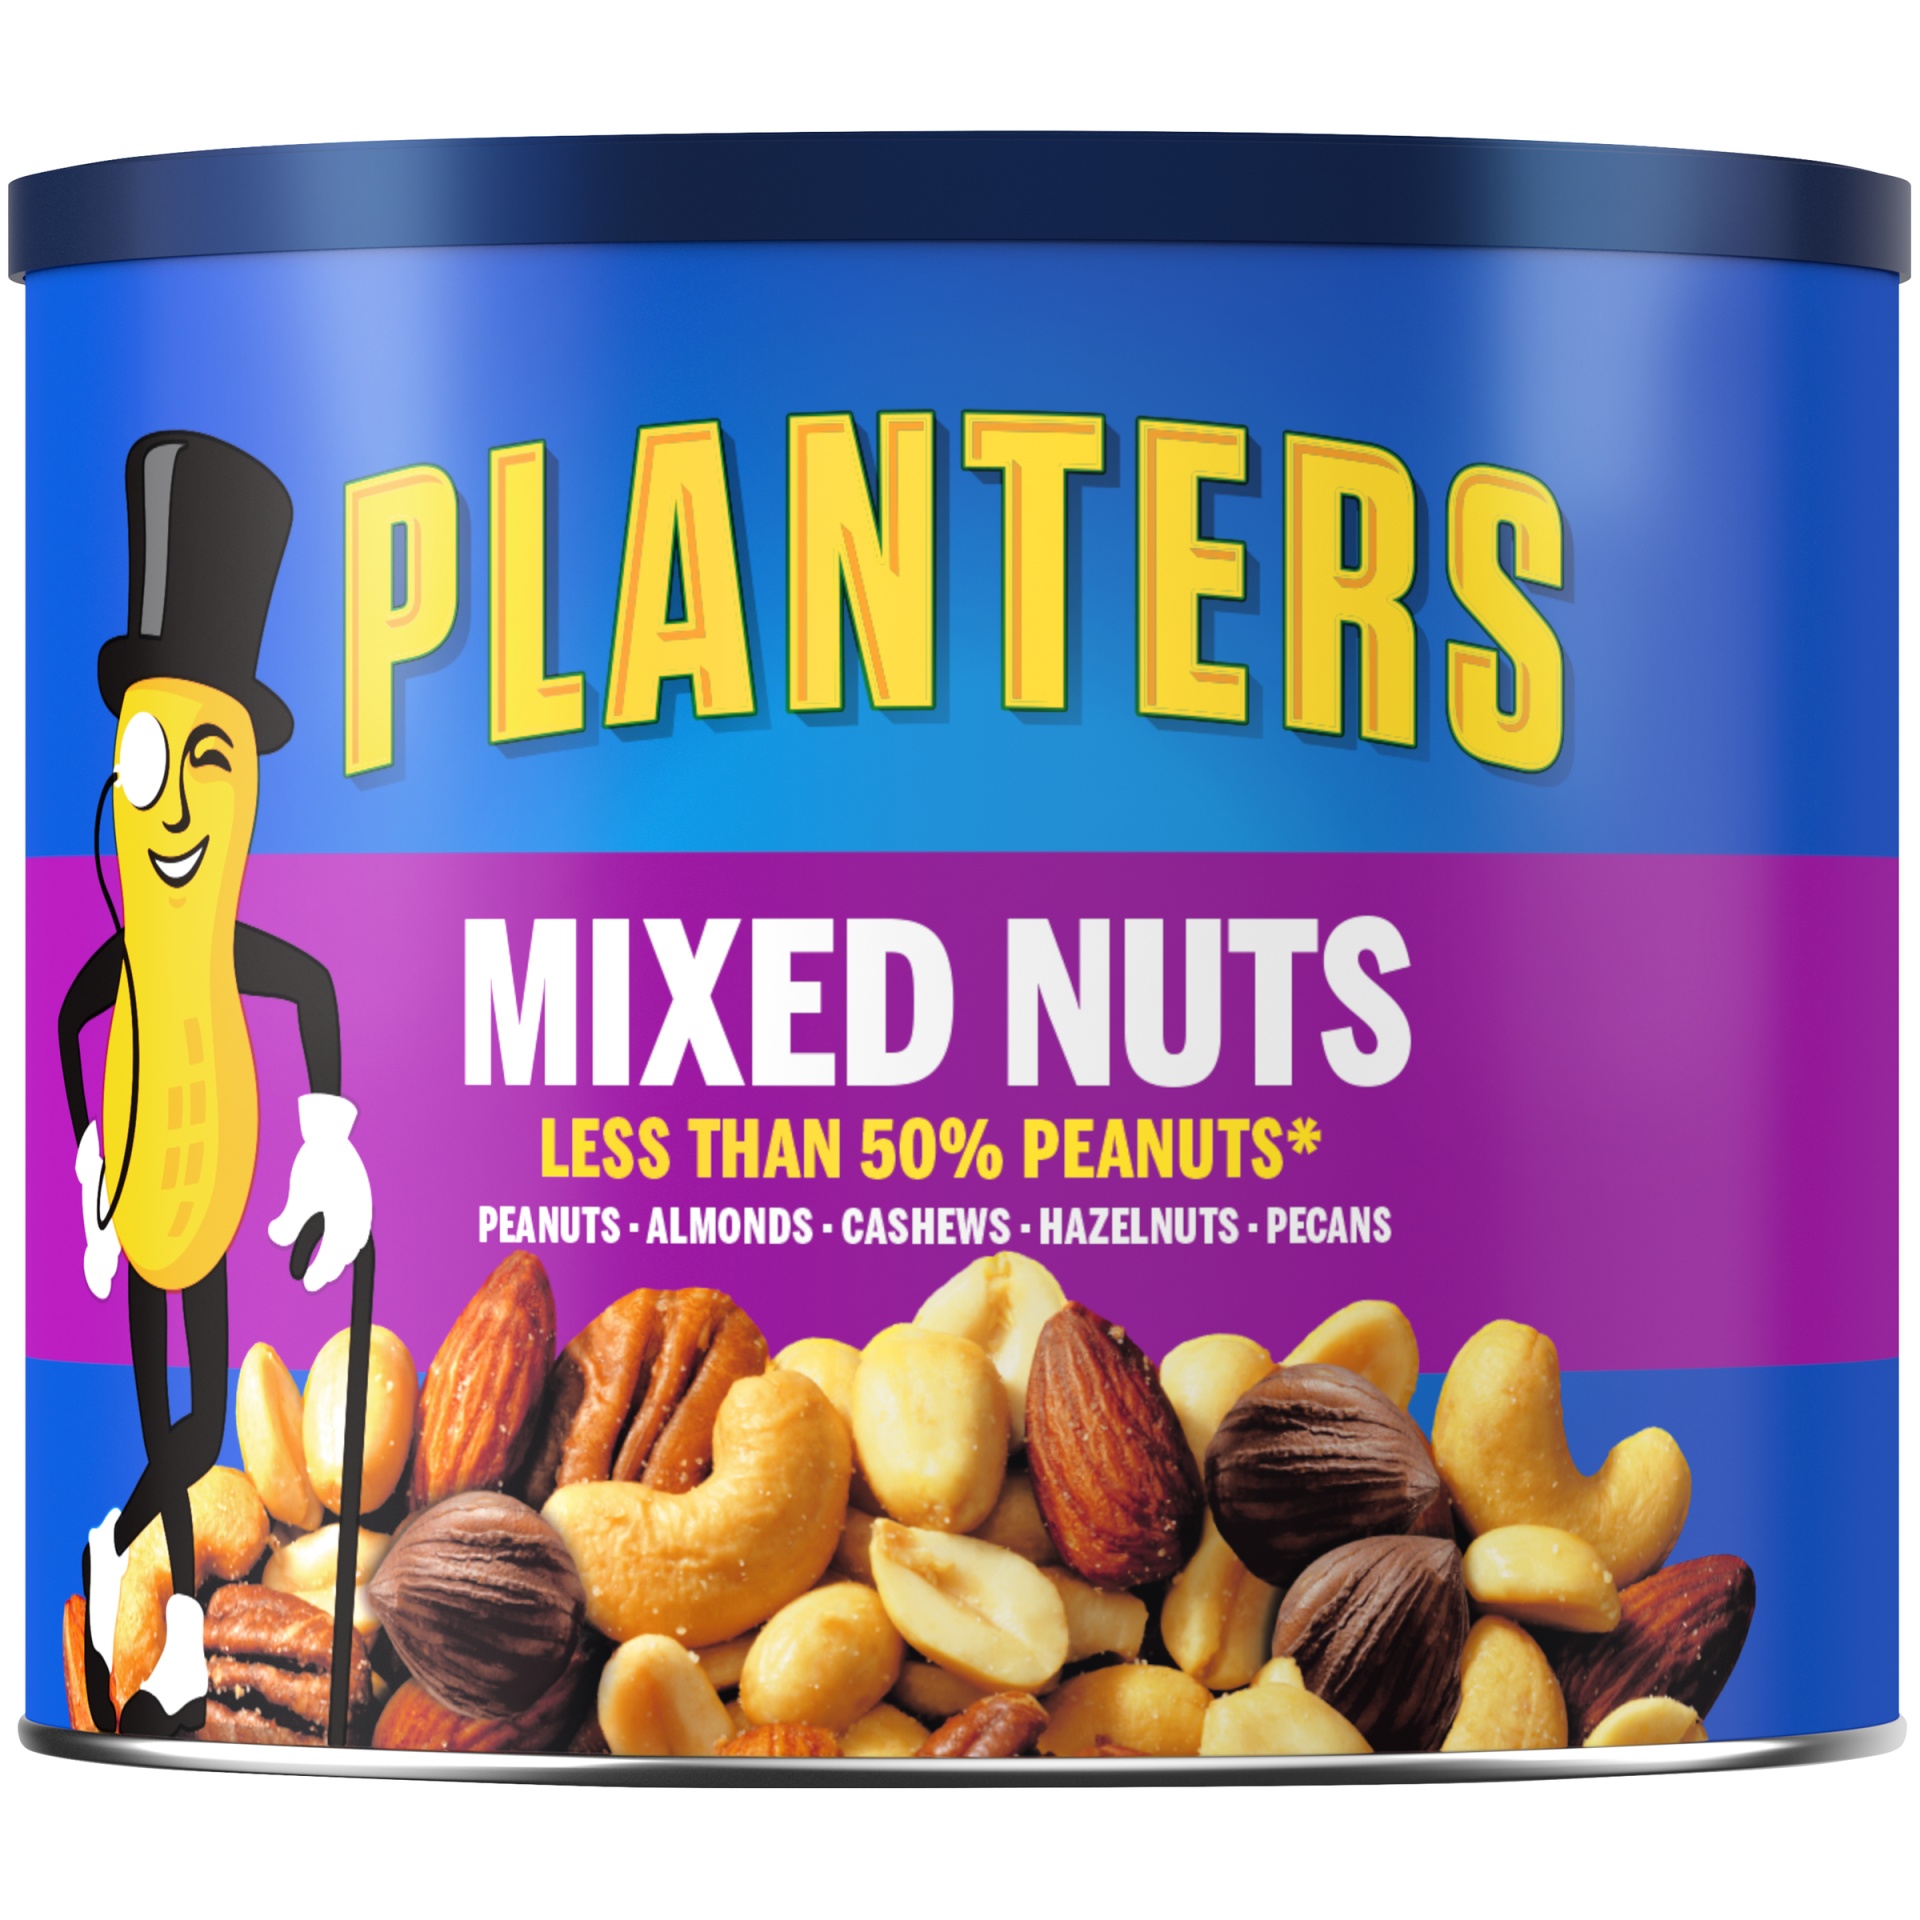 slide 12 of 15, Planters Mixed Nuts Less Than 50% Peanuts with Peanuts, Almonds, Cashews, Hazelnuts & Pecans, 10.3 oz